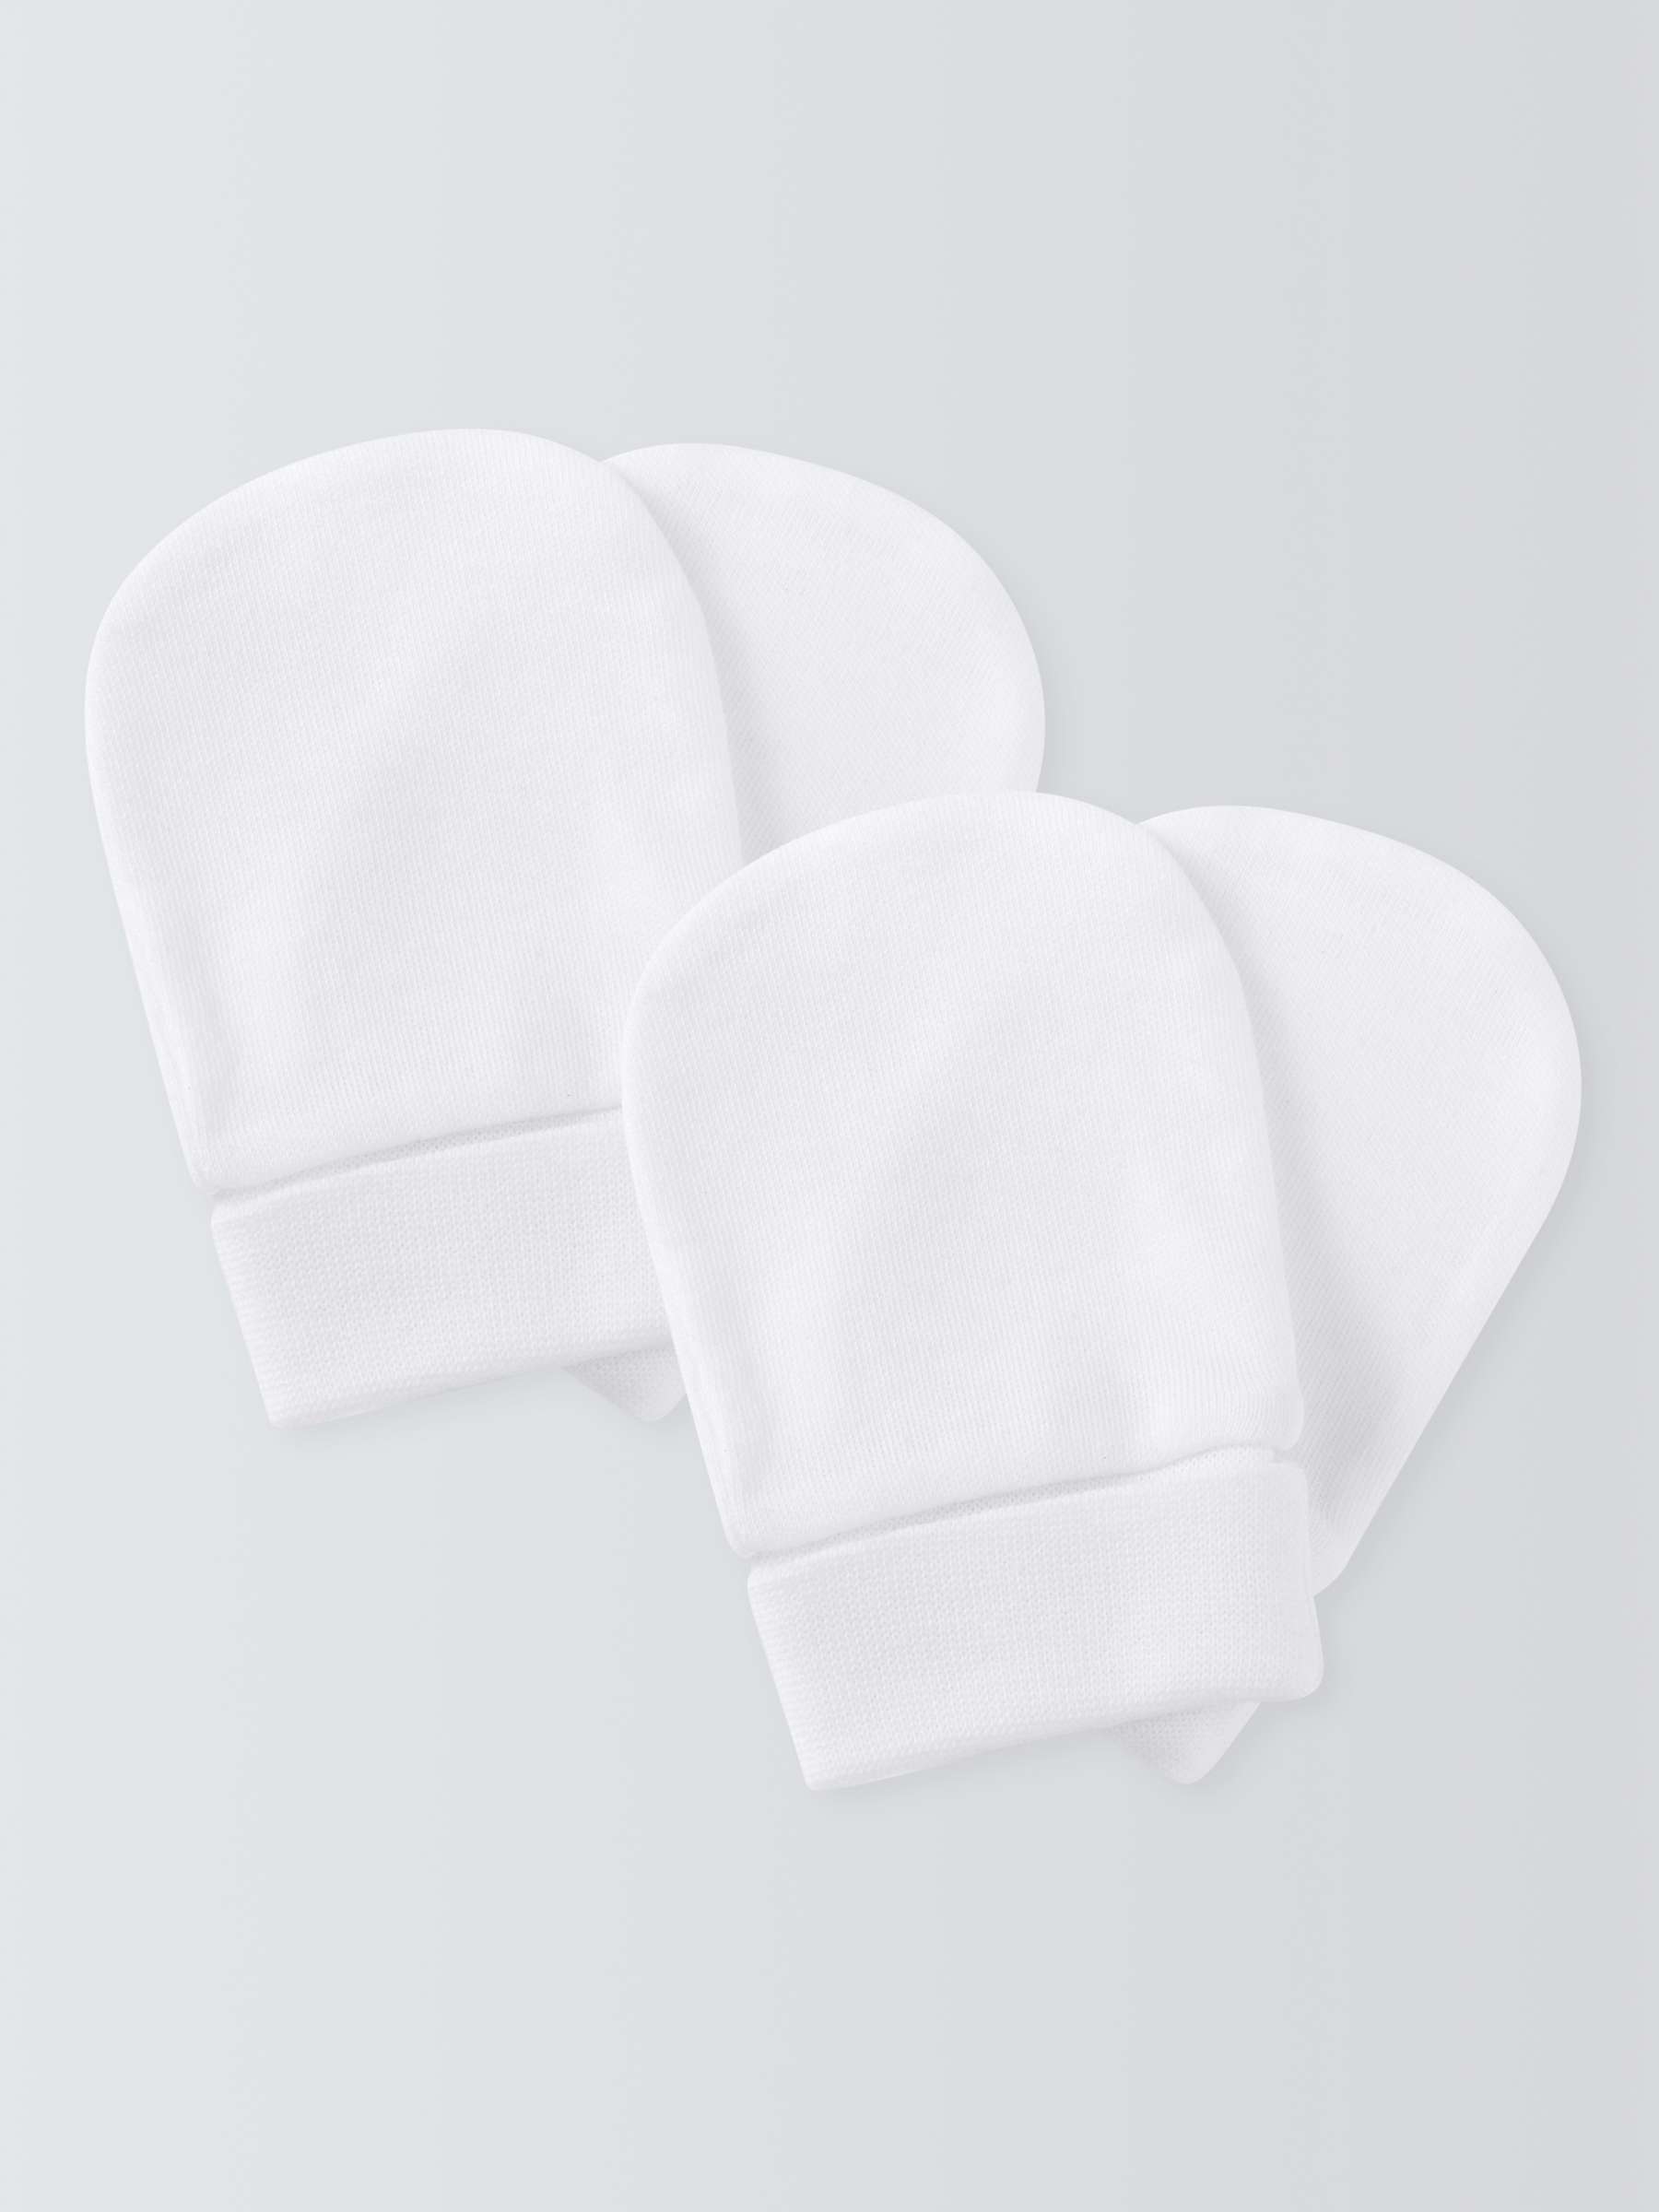 Buy John Lewis Baby Cotton Scratch Mitts, Pack of 2, White Online at johnlewis.com